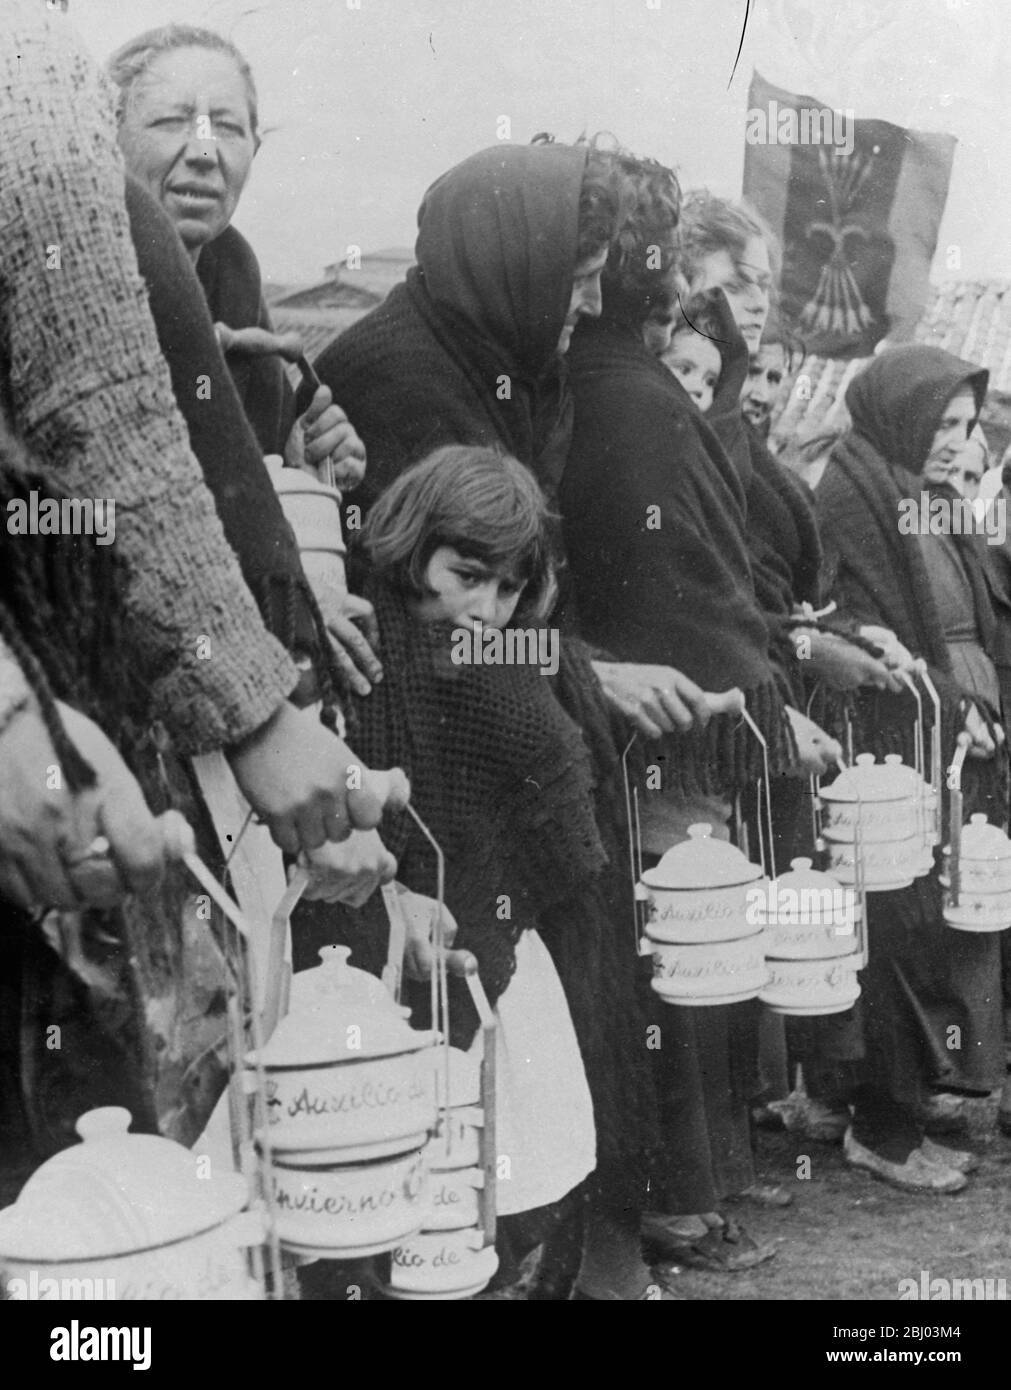 She was hungry , too . - A little girl of Salamanca huddled in her shawl against the cold as she waited in a long queue to receive food from the Winter Help organisation formed by Fascists in the part of Spain fuled by General Franco to relieve the distress of the civil war . - 10 March 1937 Stock Photo